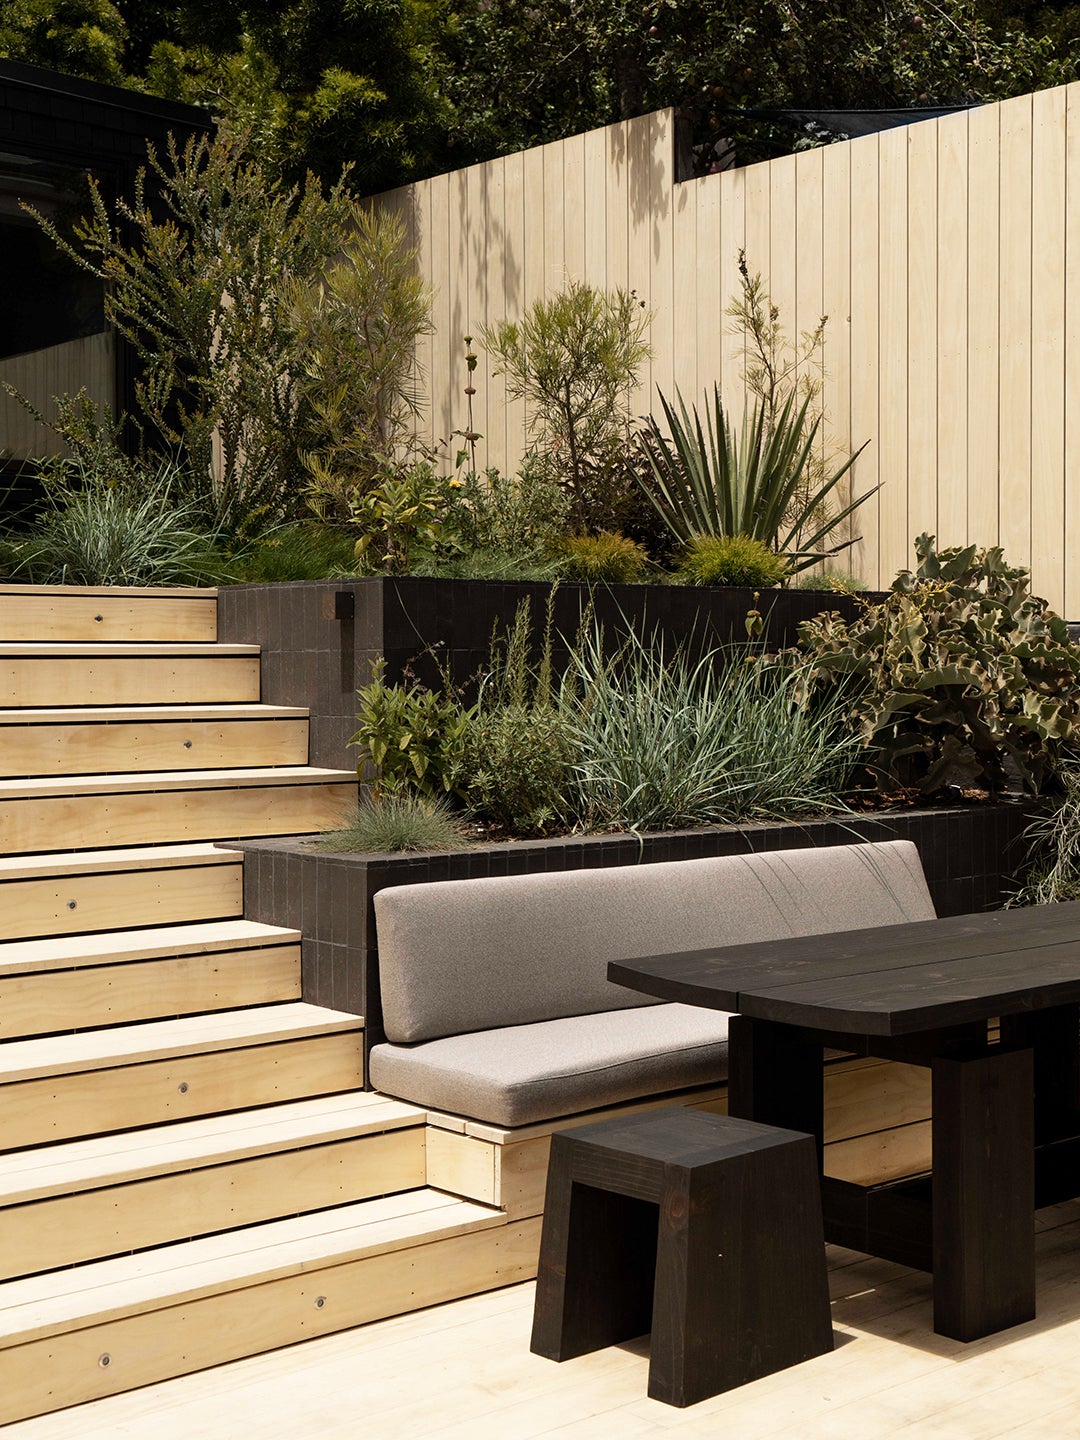 How to Maximize a Hilly San Francisco Backyard: A Winding Wood Staircase